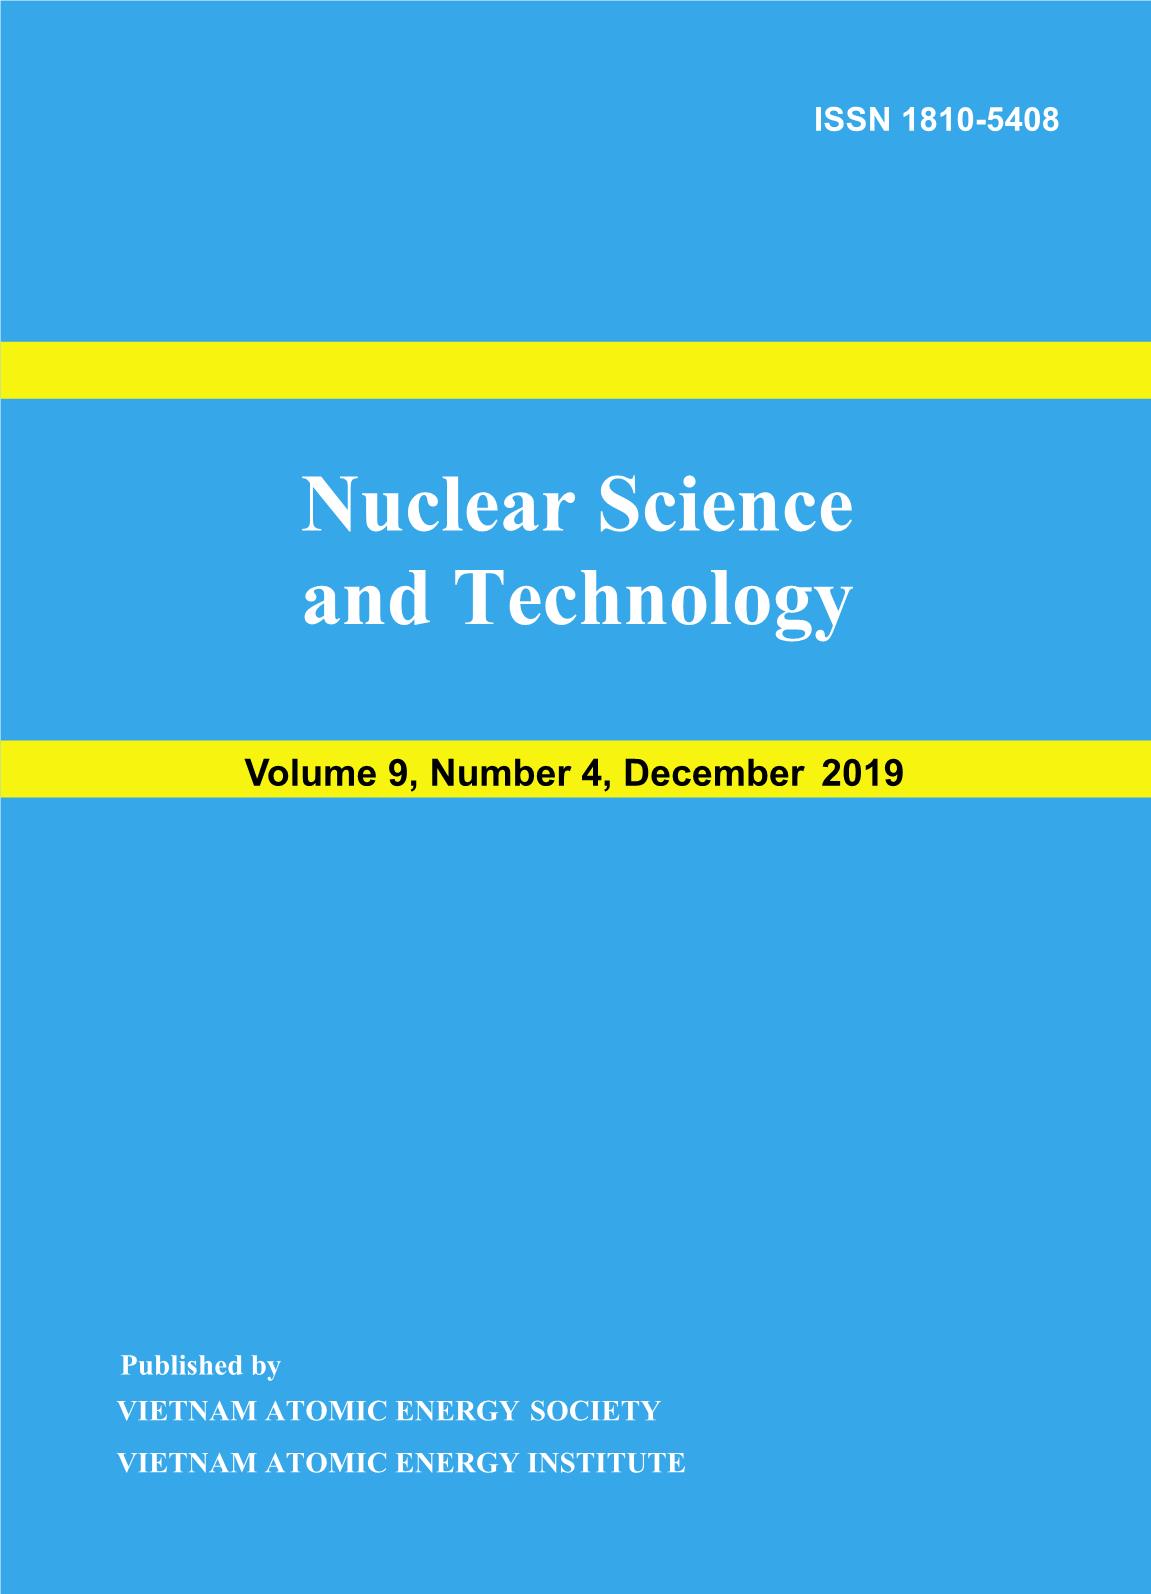 Nuclear Science and Technology - Volume 9, Number 4, December 2019 trang 1